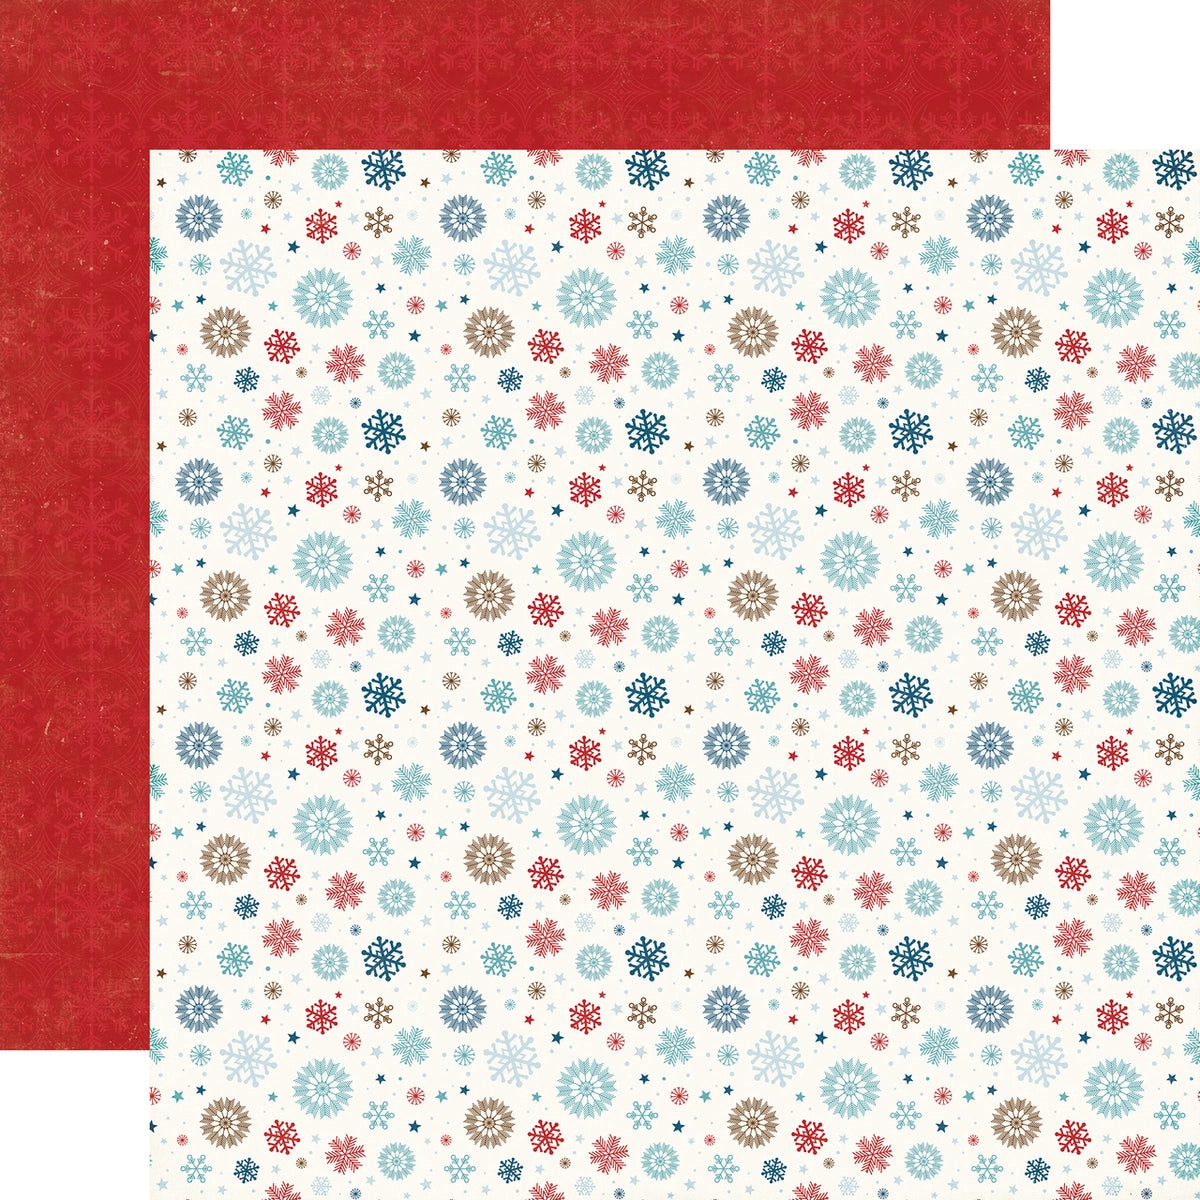 Multi-Colored (Side A - red, navy, light blue, and gold snowflakes in multiple sizes on an off-white background, Side B - red on red snowflake pattern)